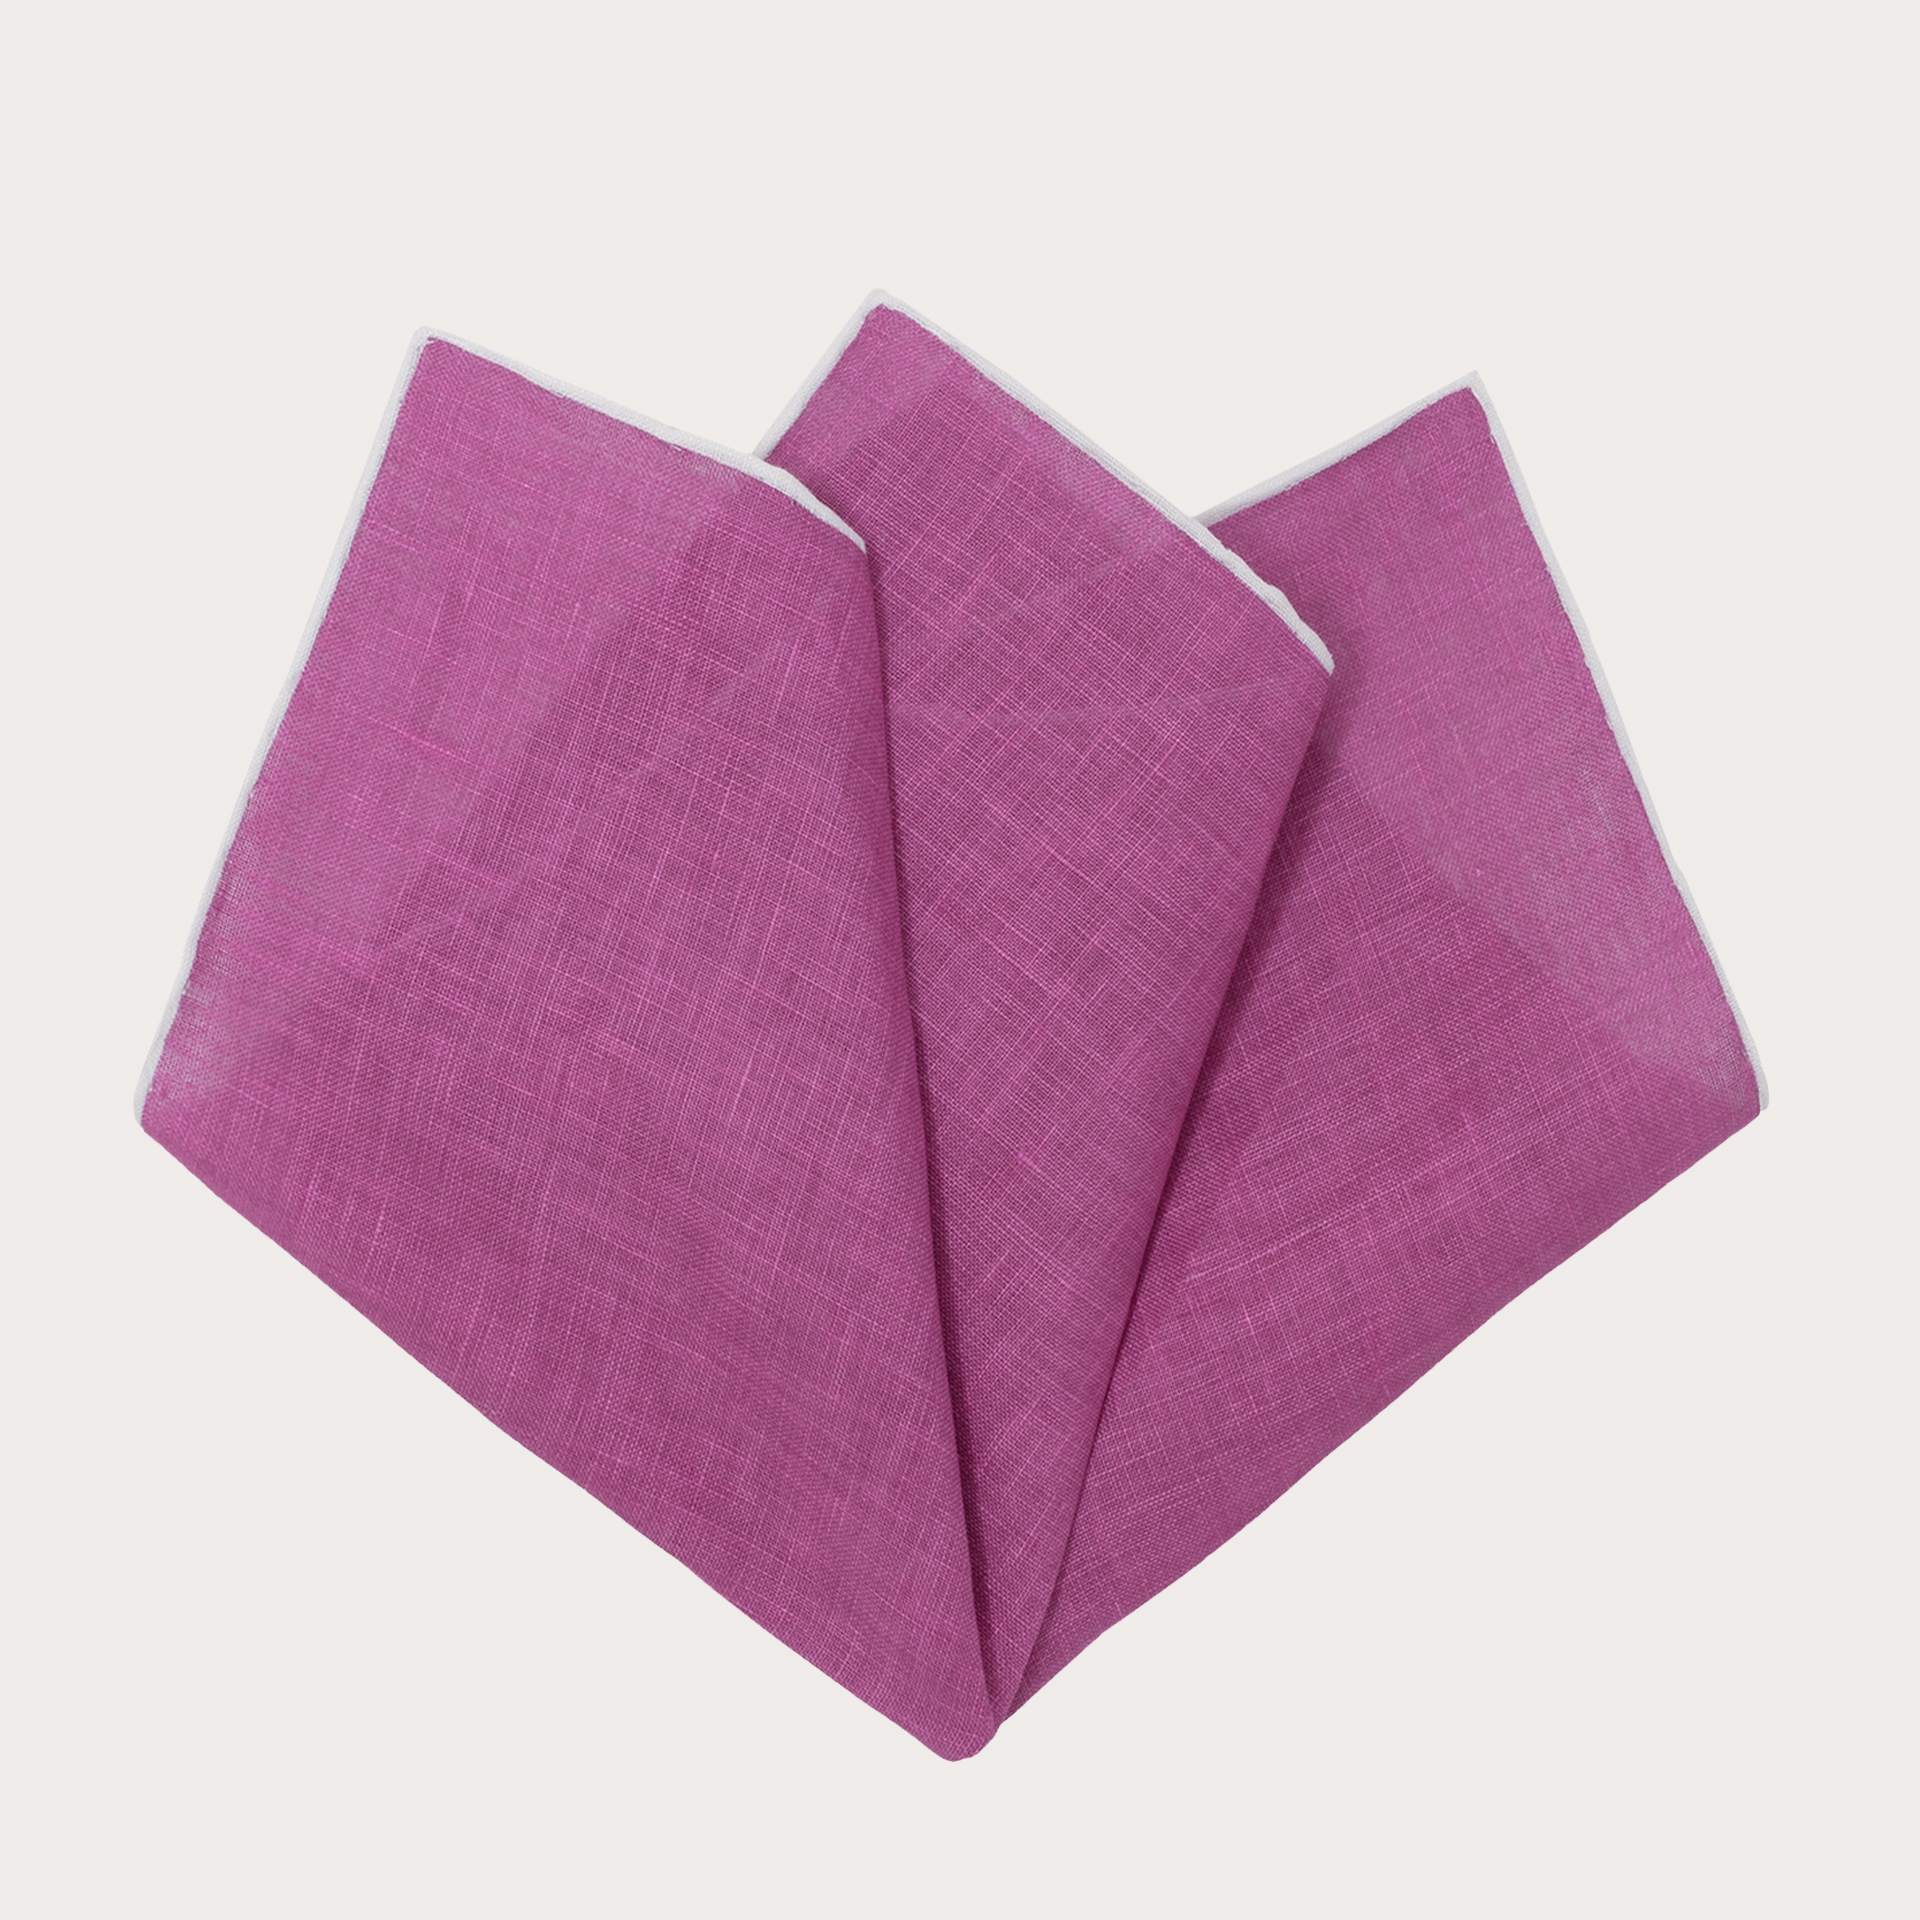 Pocket square in linen, purple with white edges